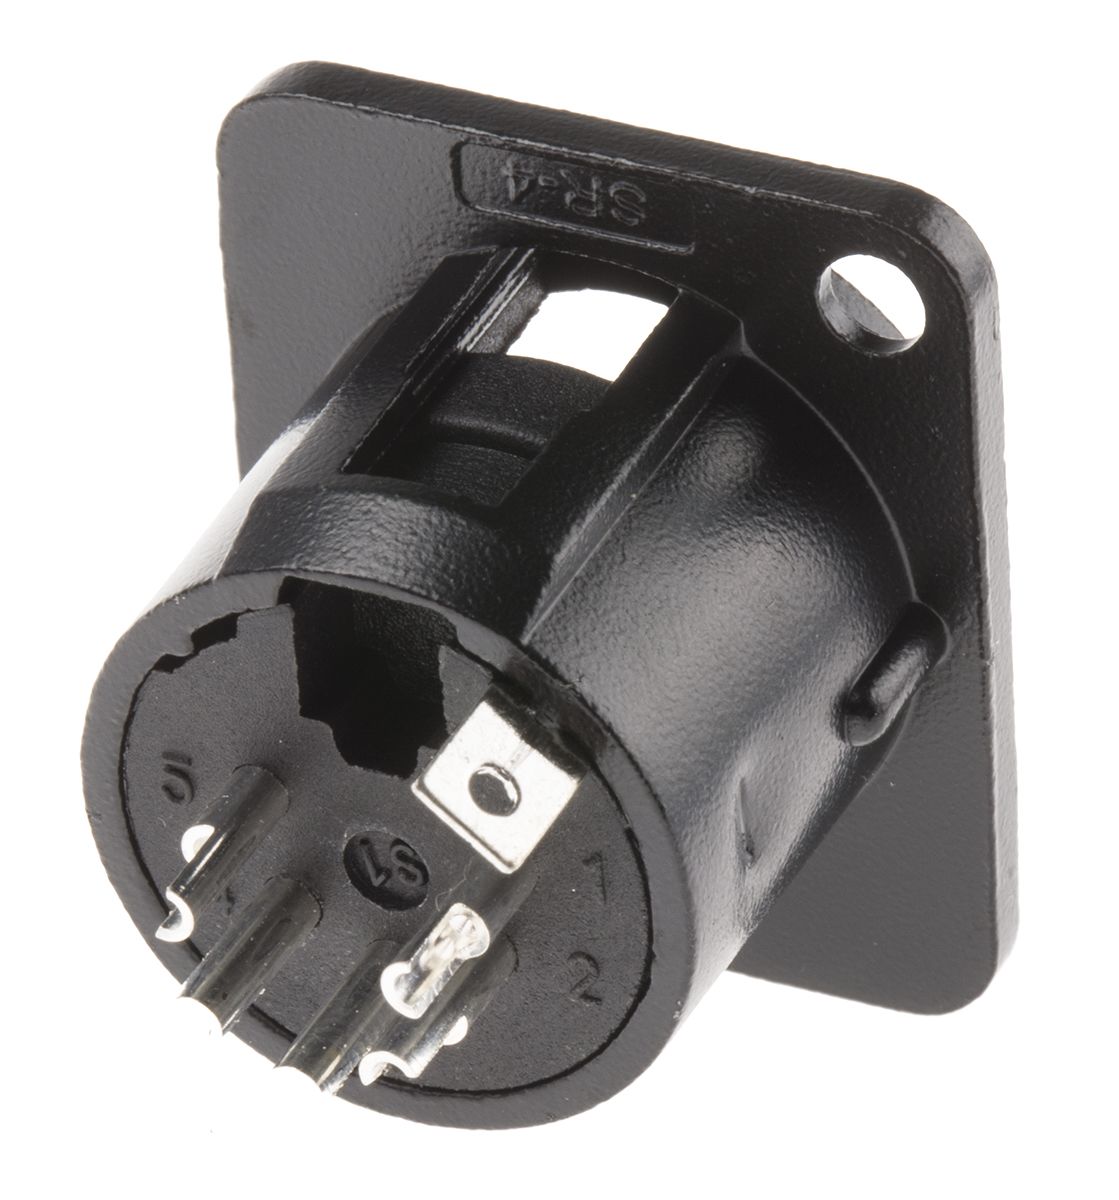 RS PRO Panel Mount XLR Connector, Male, 5 Way